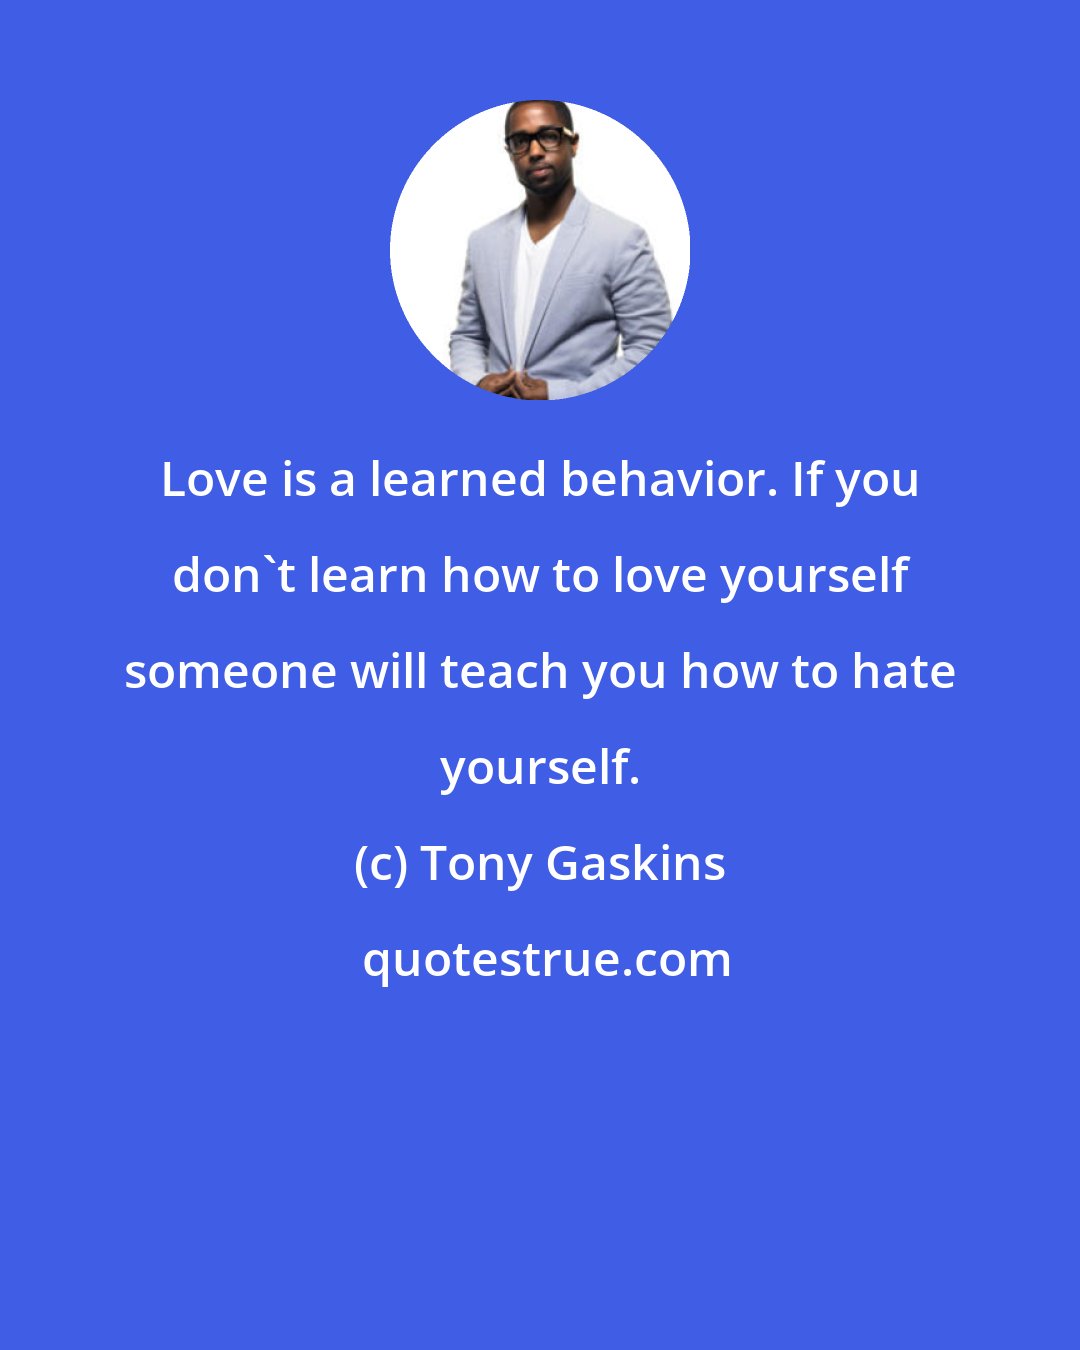 Tony Gaskins: Love is a learned behavior. If you don't learn how to love yourself someone will teach you how to hate yourself.